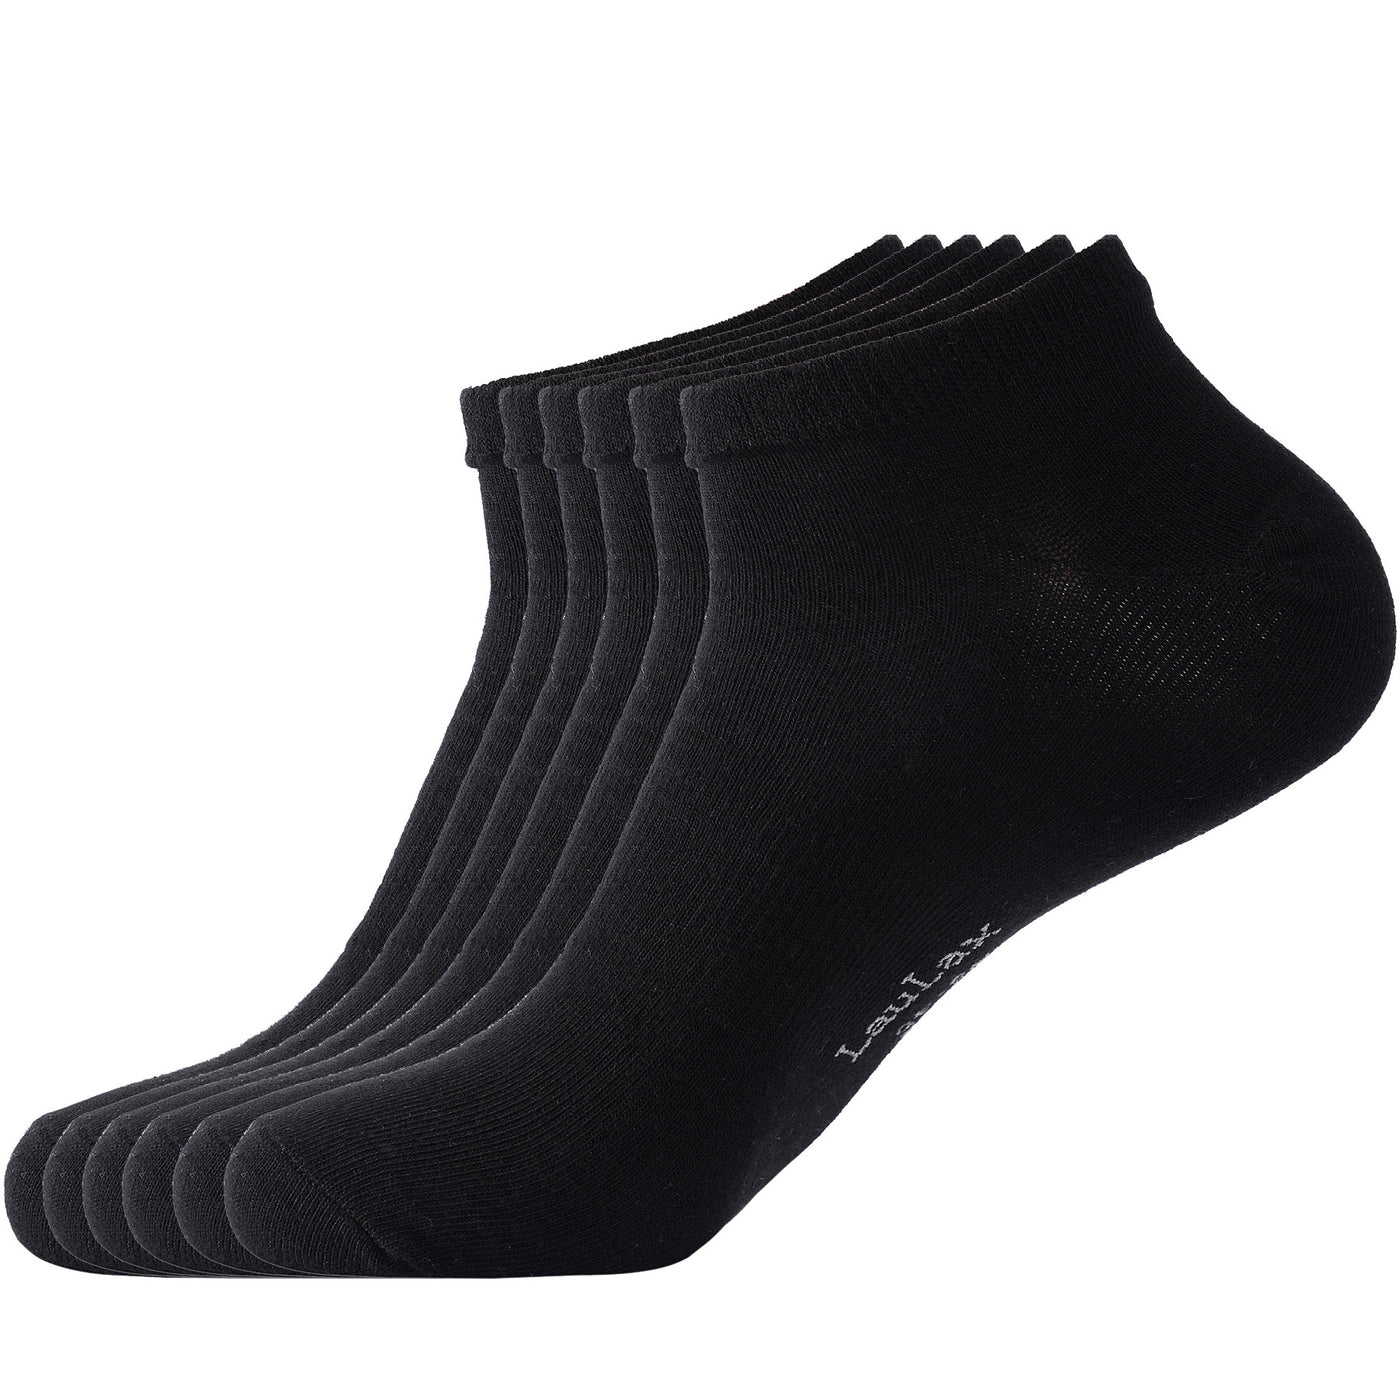 Laulax 6 Pairs Finest Combed Cotton Trainer Socks, Black, Size UK 9 - 11 / Europ 43 - 46, Gift bag with socks wash bag